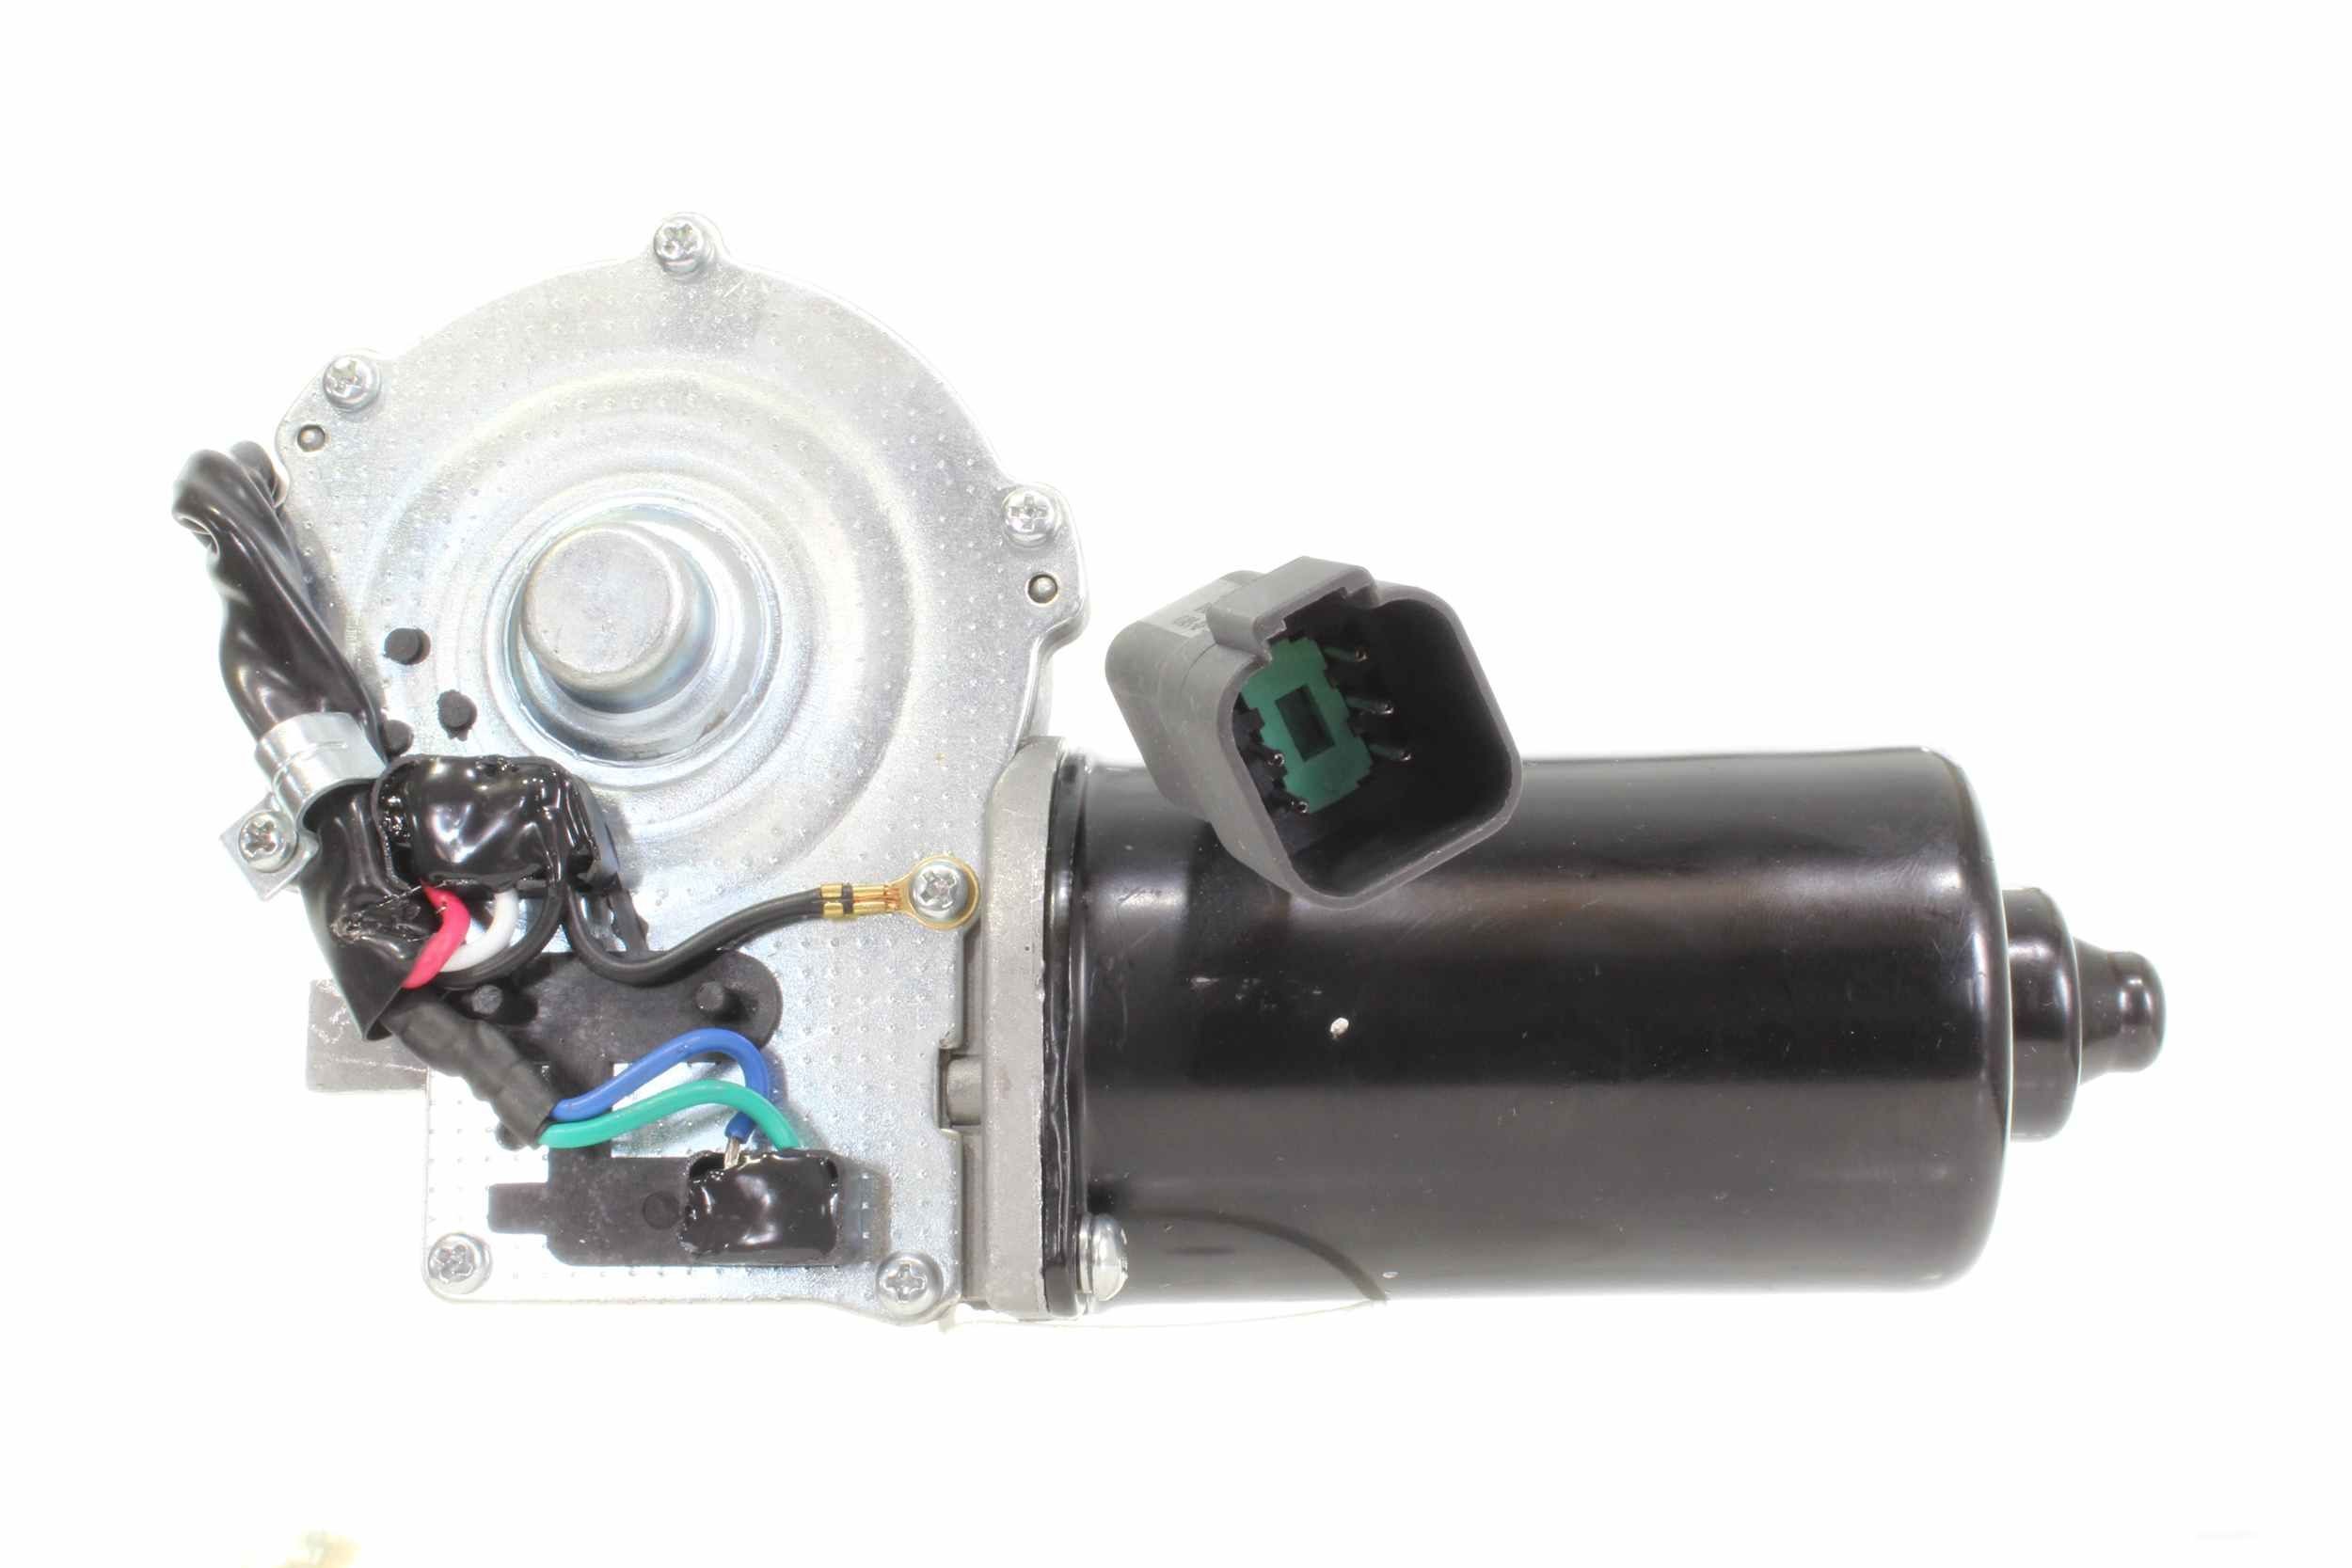 ALANKO 800783 Wiper motors 12V, Front, 70W, IP23, for left-hand/right-hand drive vehicles